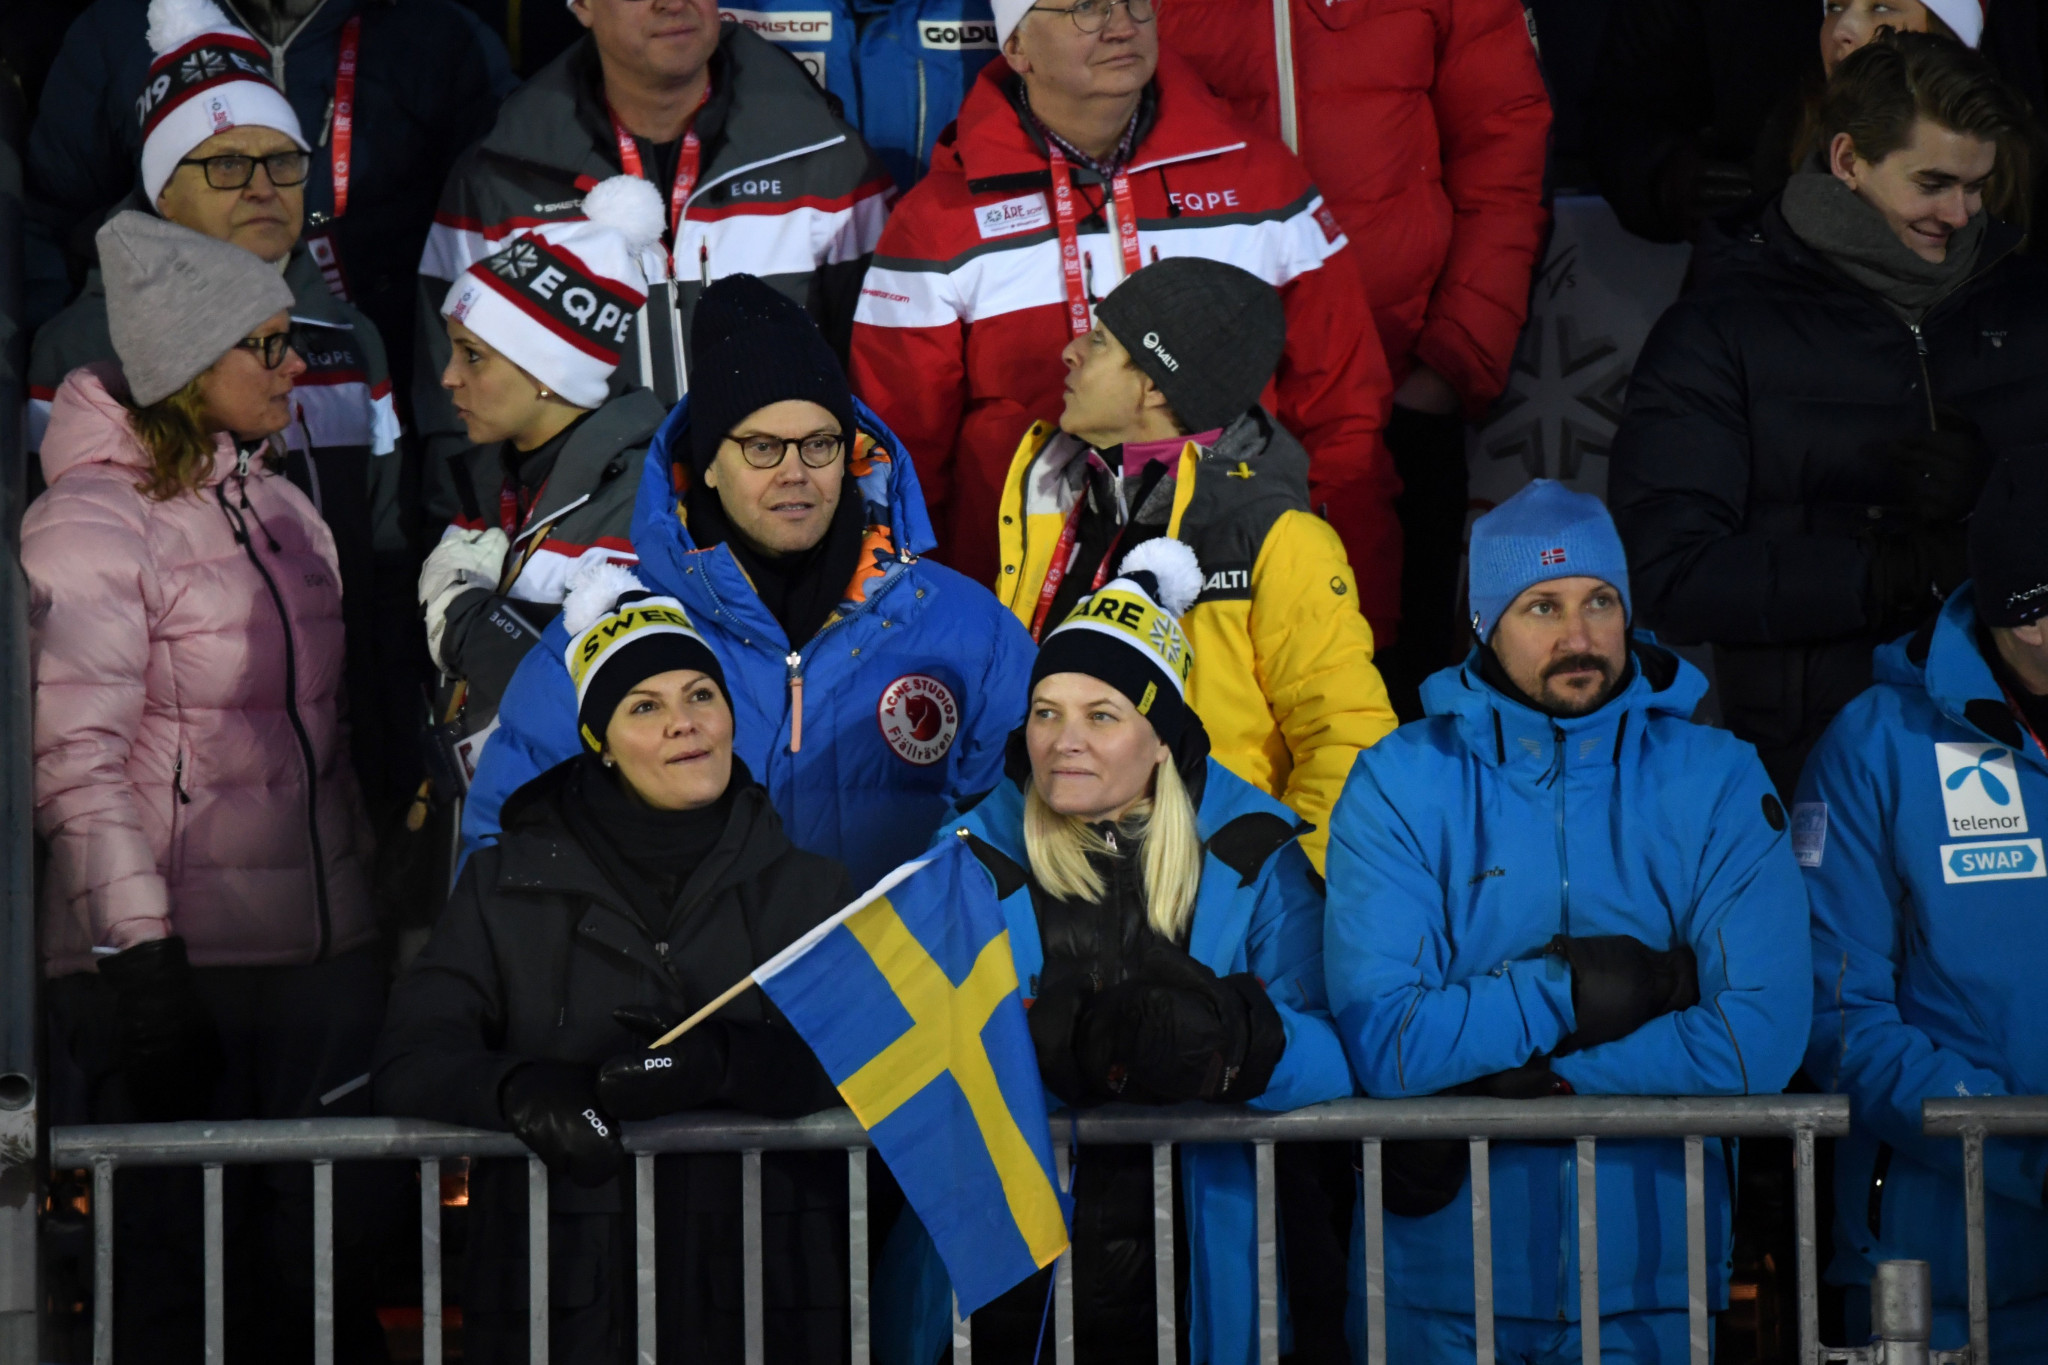 Swedish royalty was present to watch competition in Åre ©Getty Images